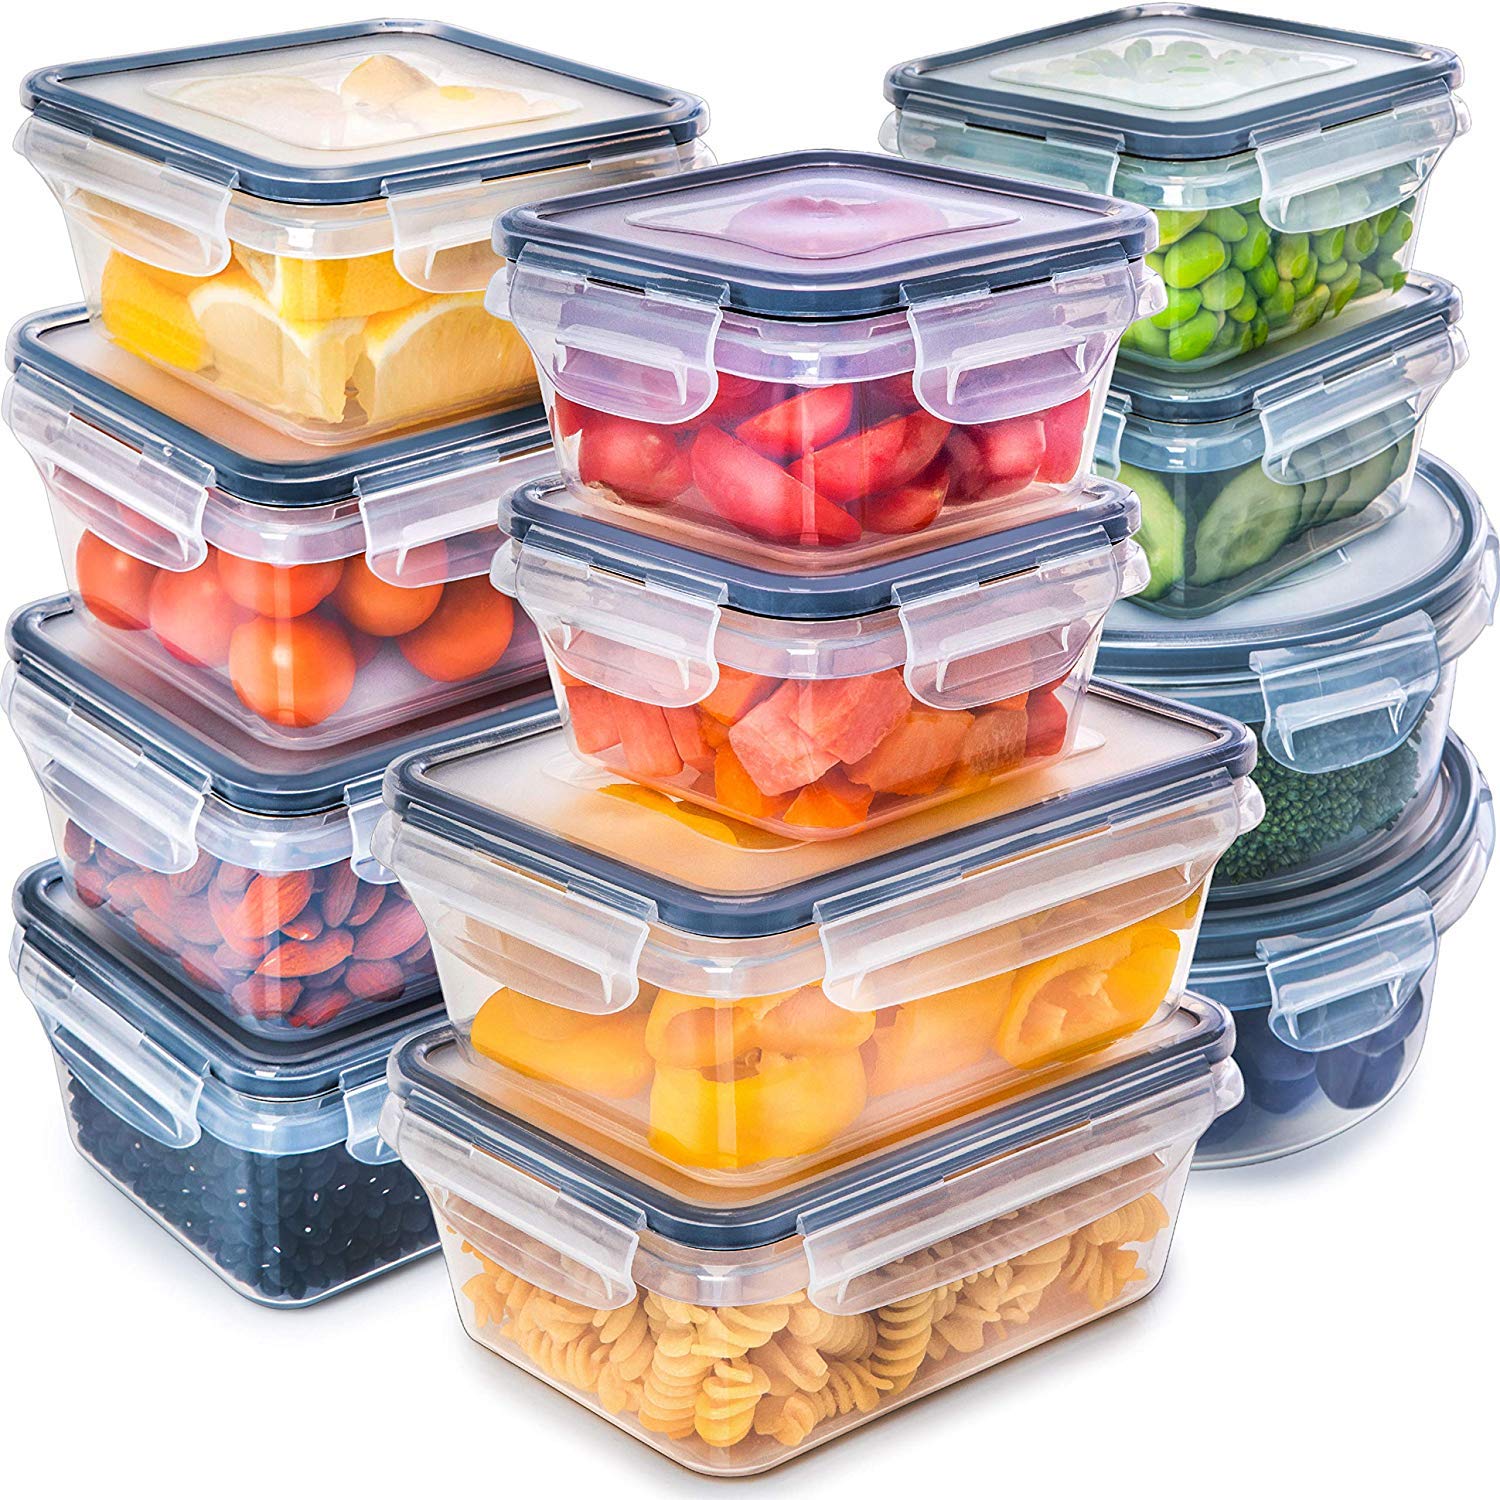 fullstar 50-piece Food storage Containers Set with Lids, Plastic Leak-Proof  BPA-Free Containers for Kitchen Organization, Meal Prep, Lunch Containers